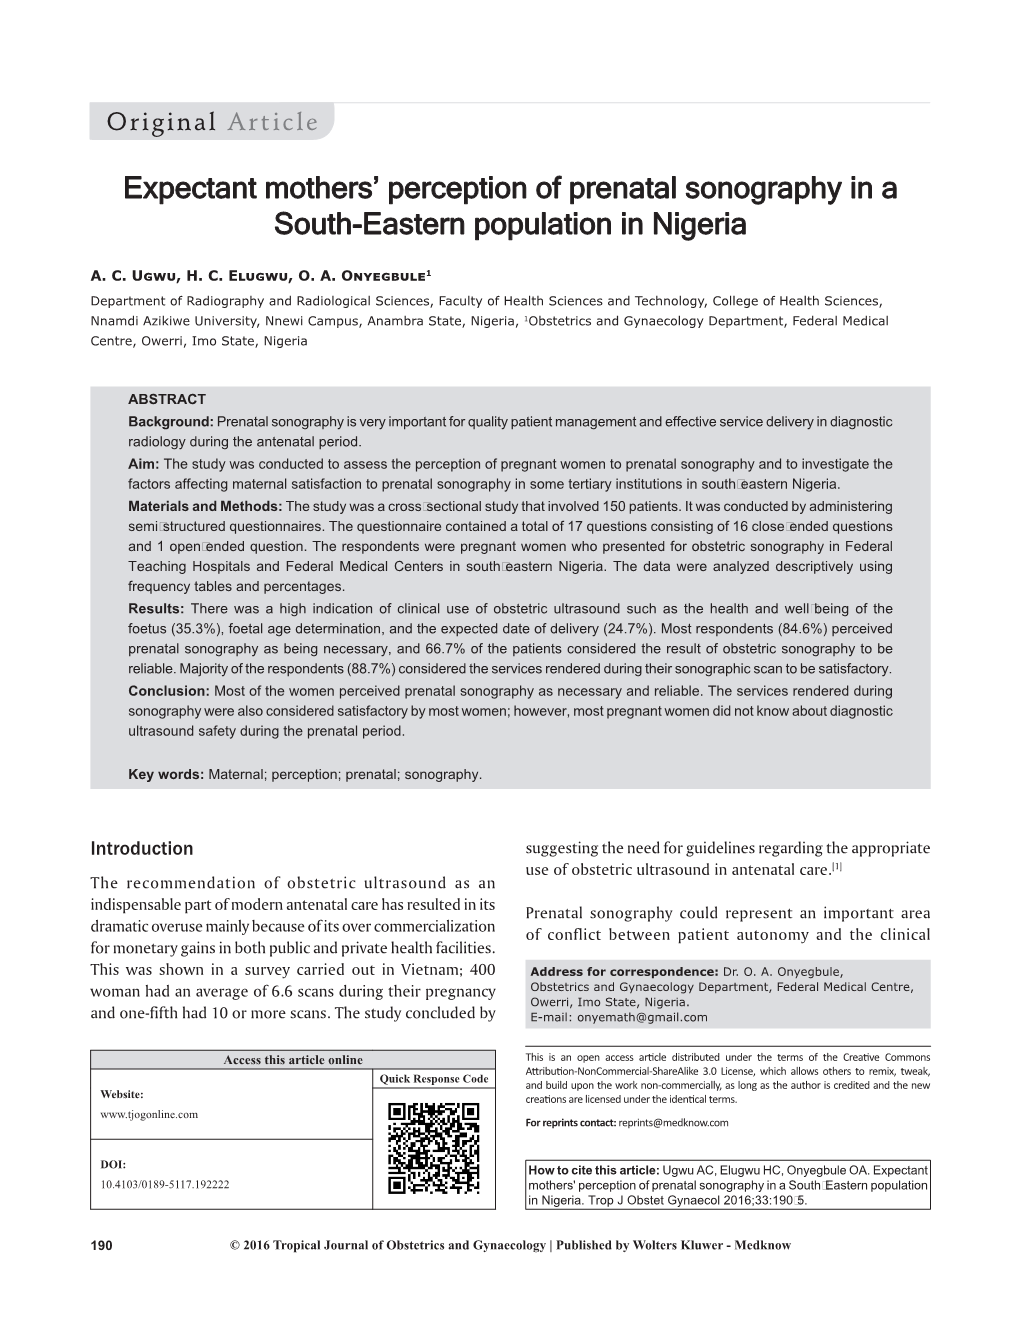 Expectant Mothers' Perception of Prenatal Sonography in a South